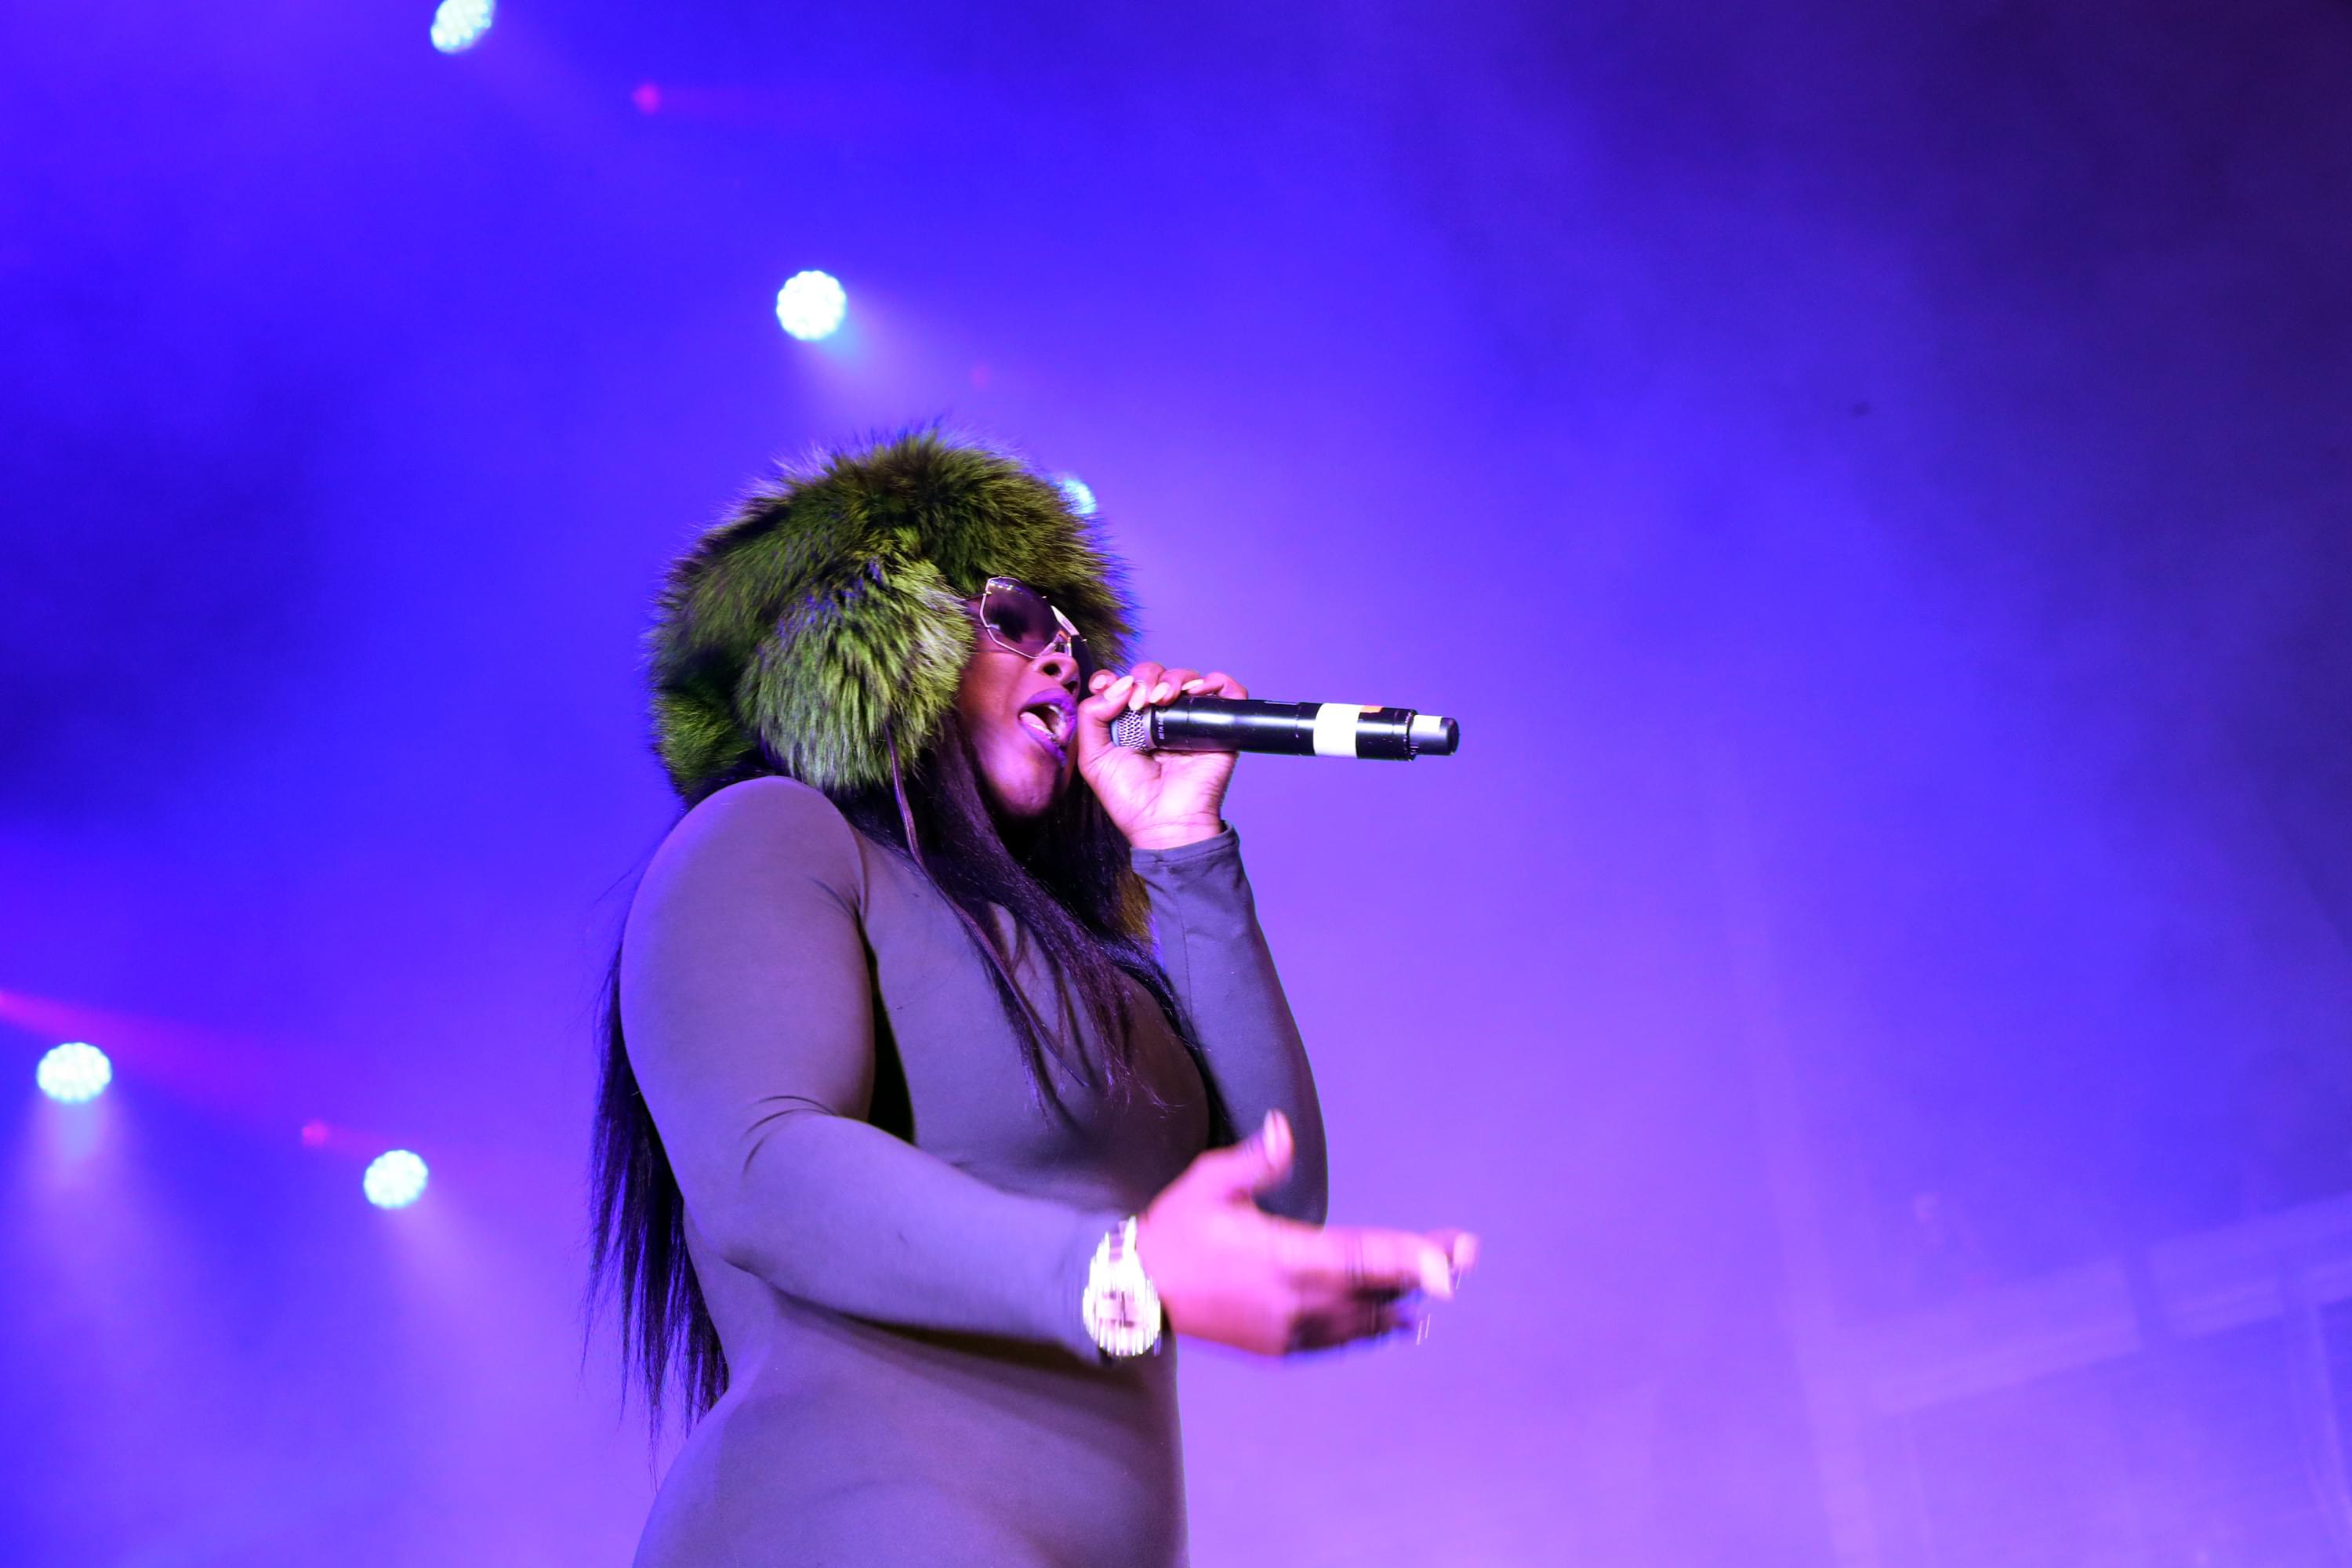 Is Remy Ma Dissing Nicki Minaj On This ‘Mask Off’ Beat? [LISTEN]